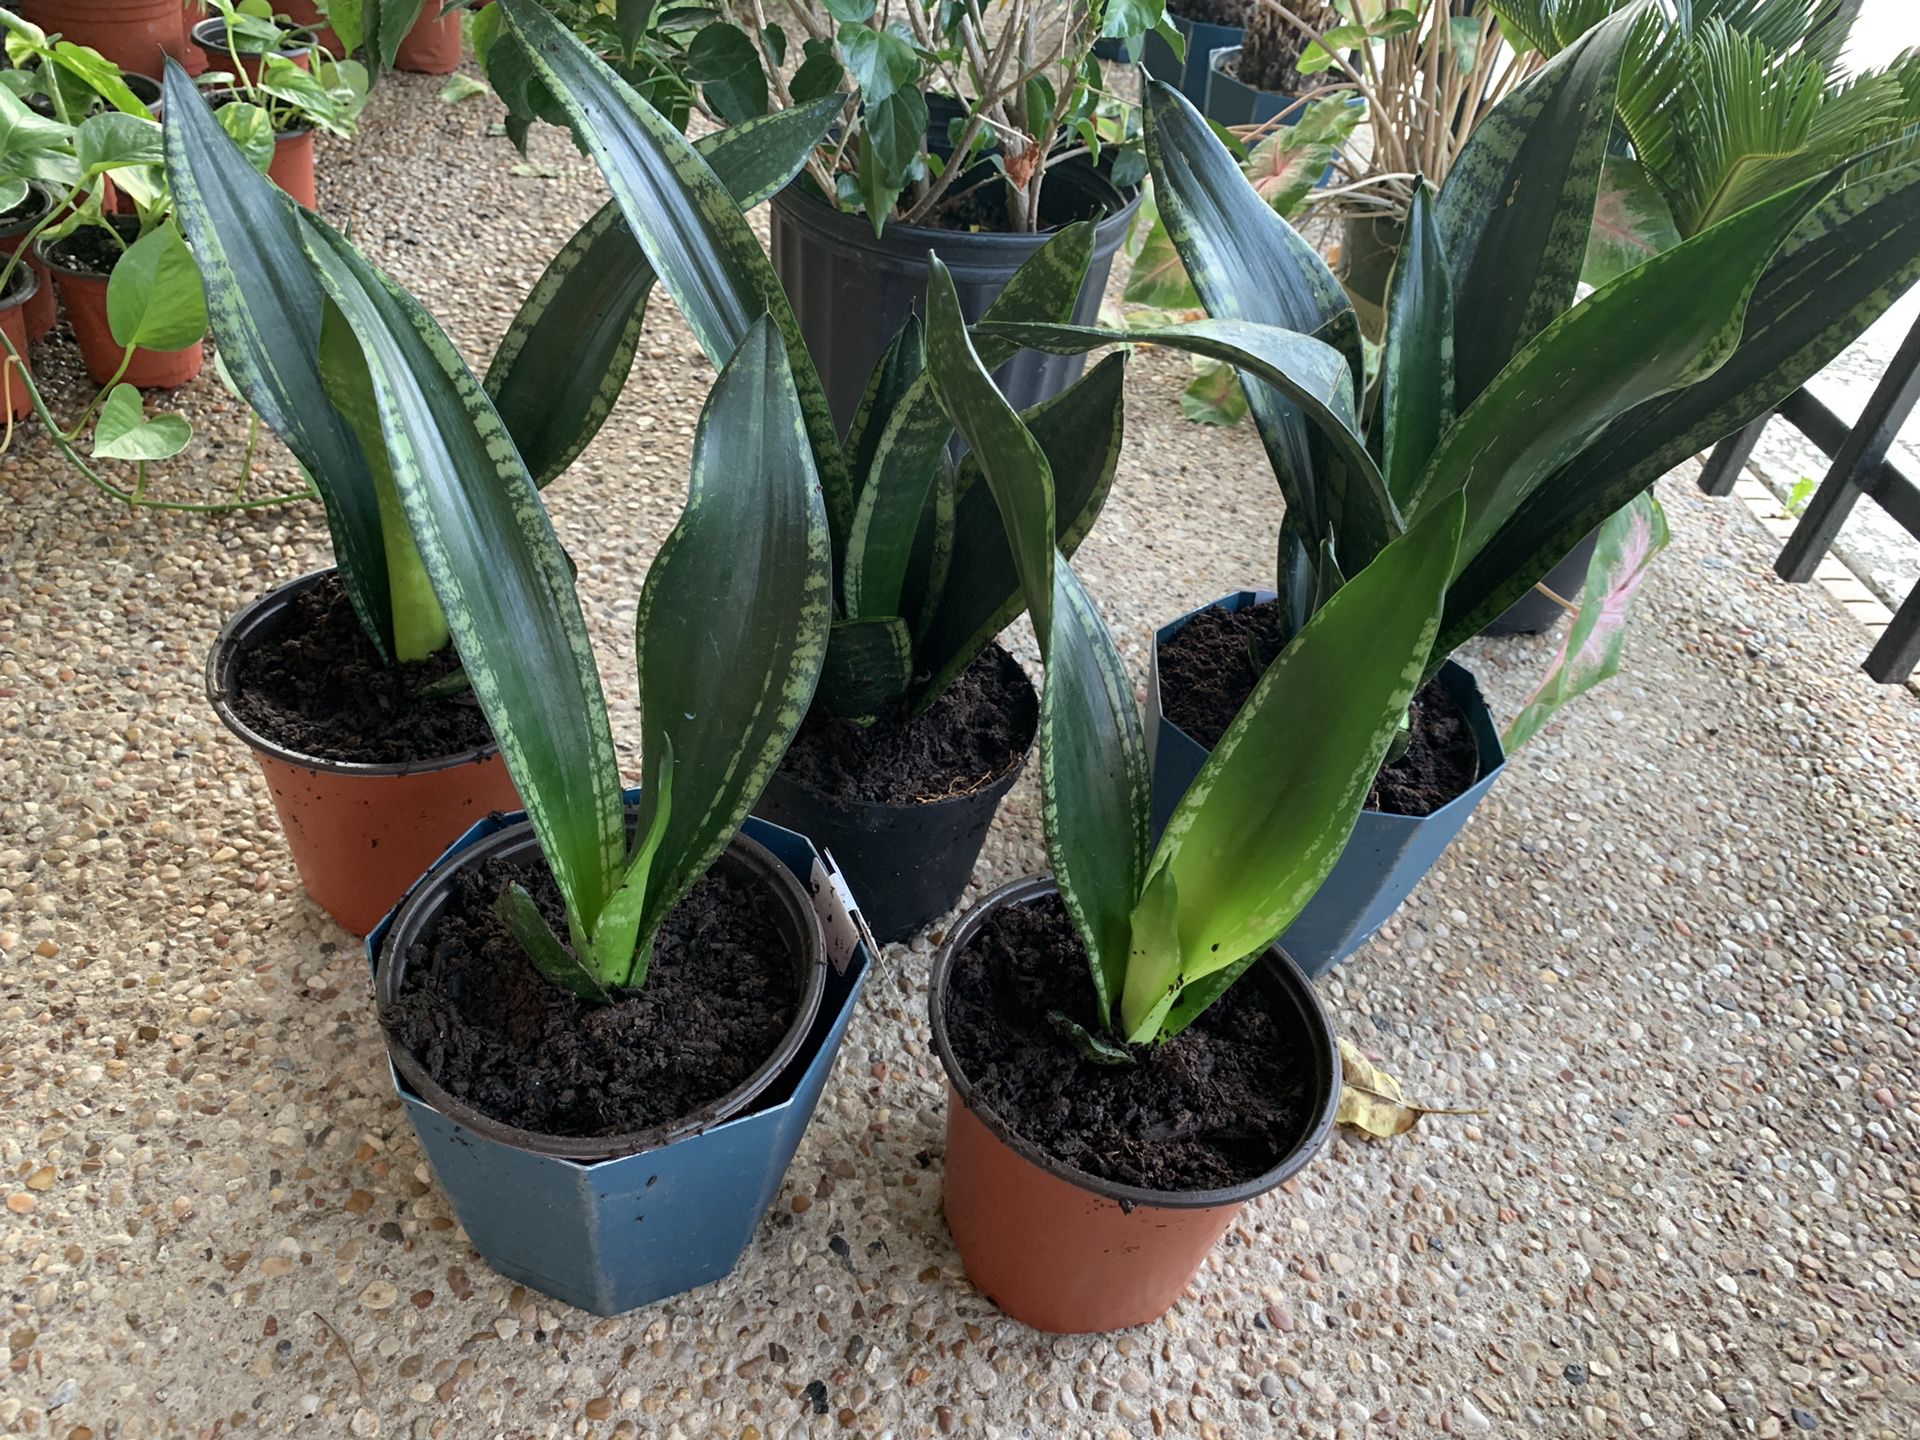 Another snake plant variety